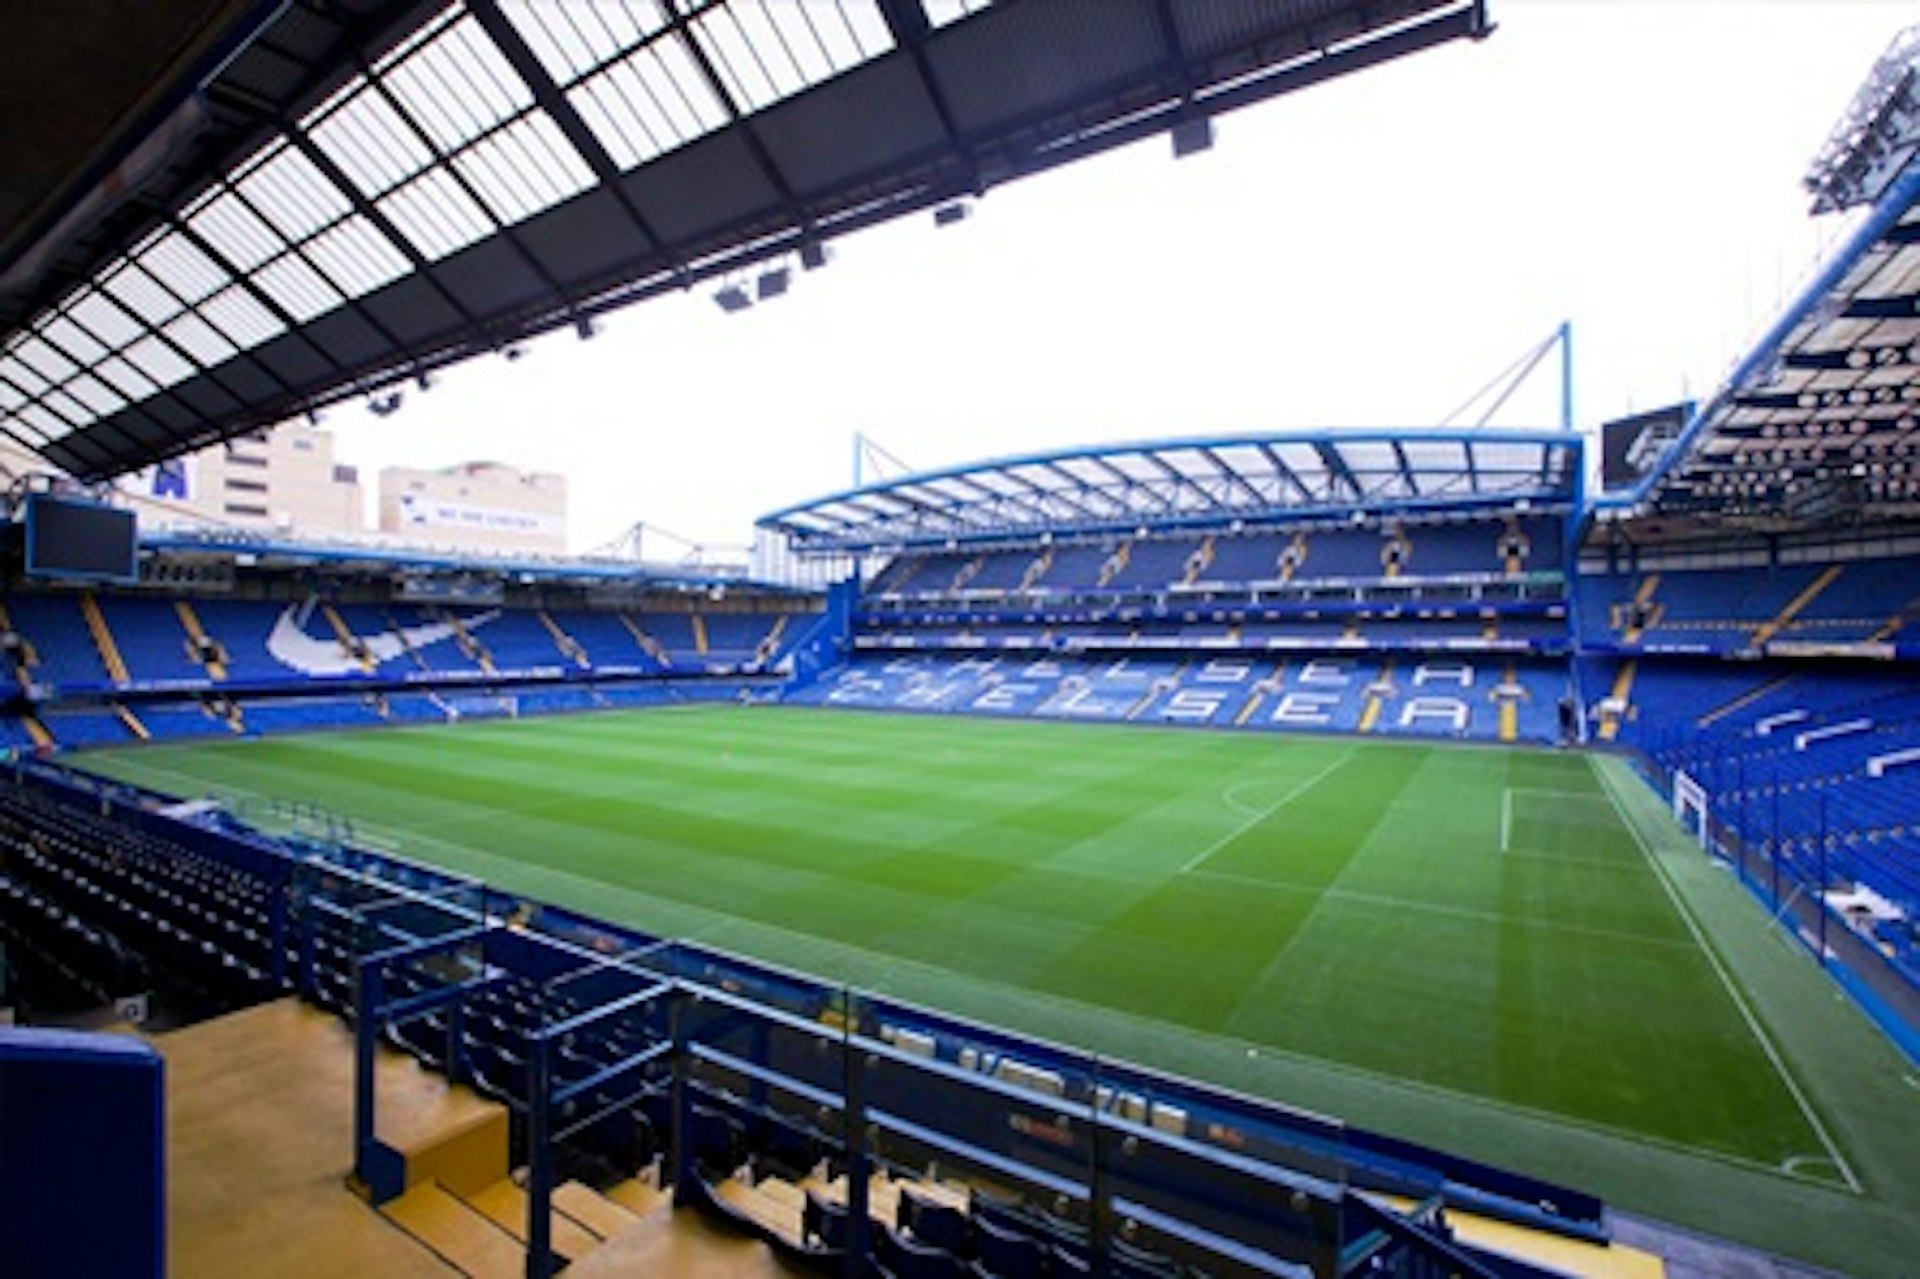 Chelsea Football Club Stadium Tour for One Adult and One Child 4